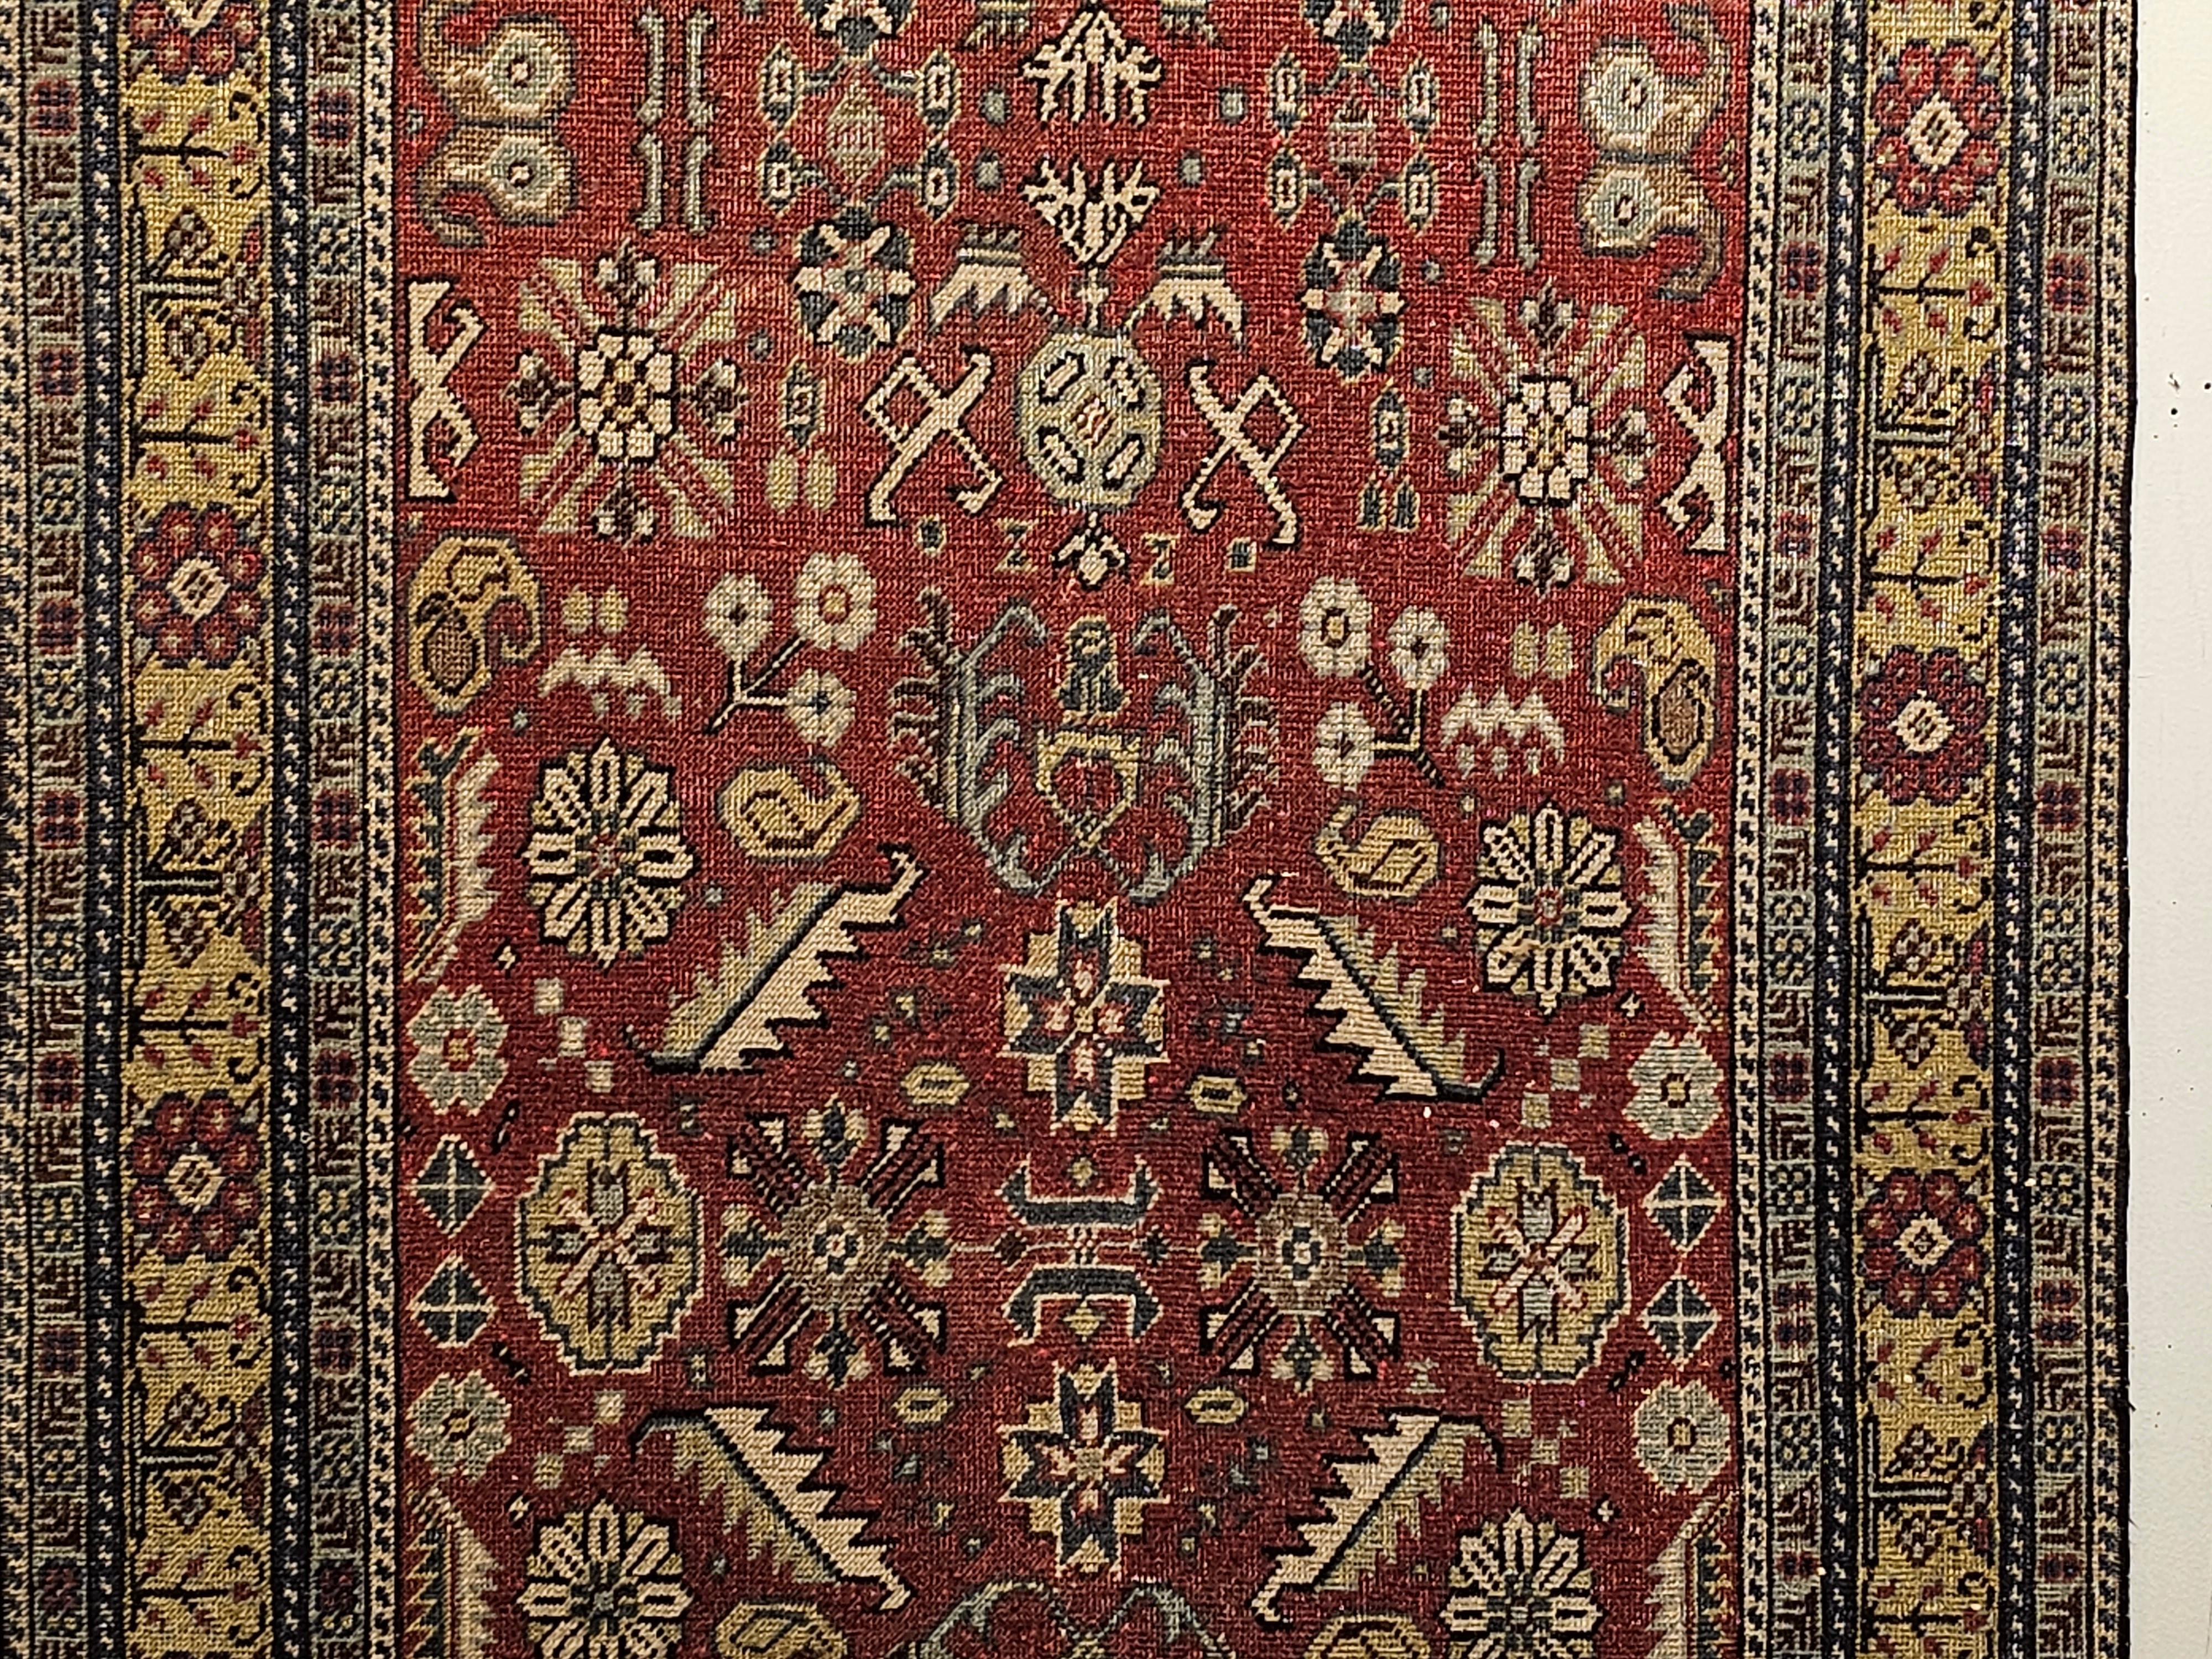 Vintage Khotan Area Rug in Allover Geometric Pattern on Brick Red, Yellow, Ivory In Good Condition For Sale In Barrington, IL